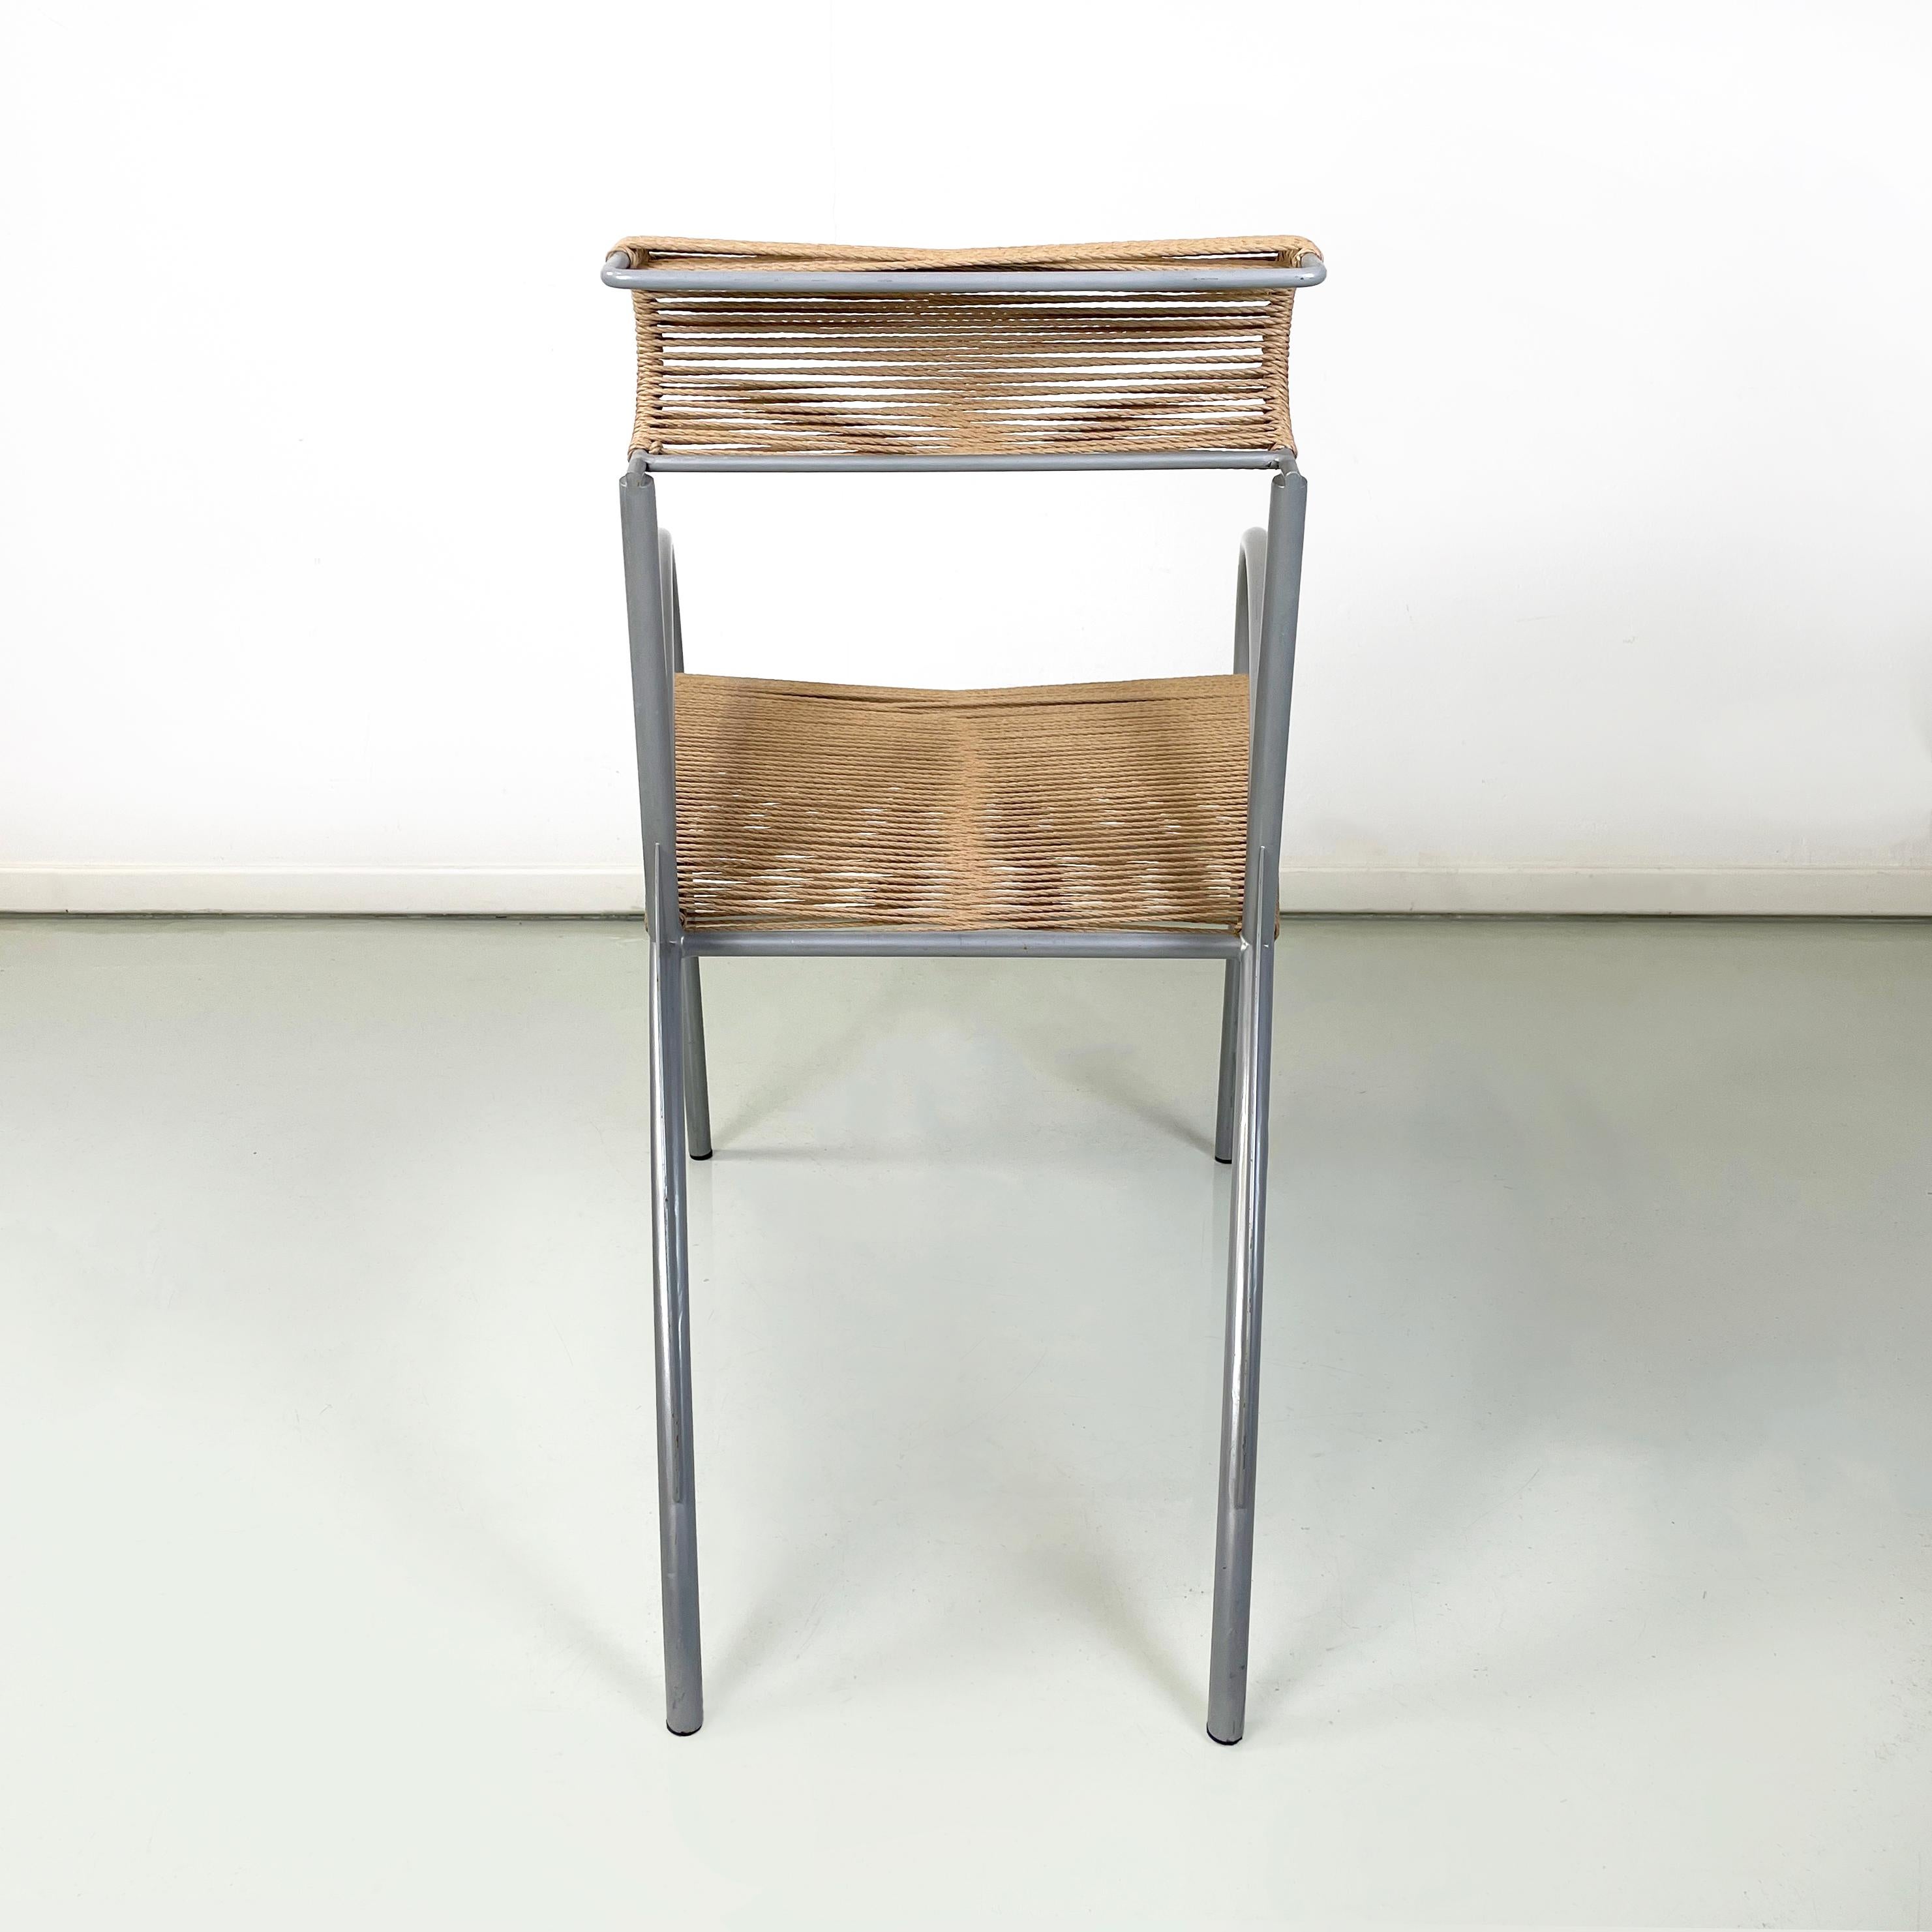 Italian modern rope and gray steel chair Juliette by Massimo Iosa-Ghini, 1990s In Good Condition For Sale In MIlano, IT